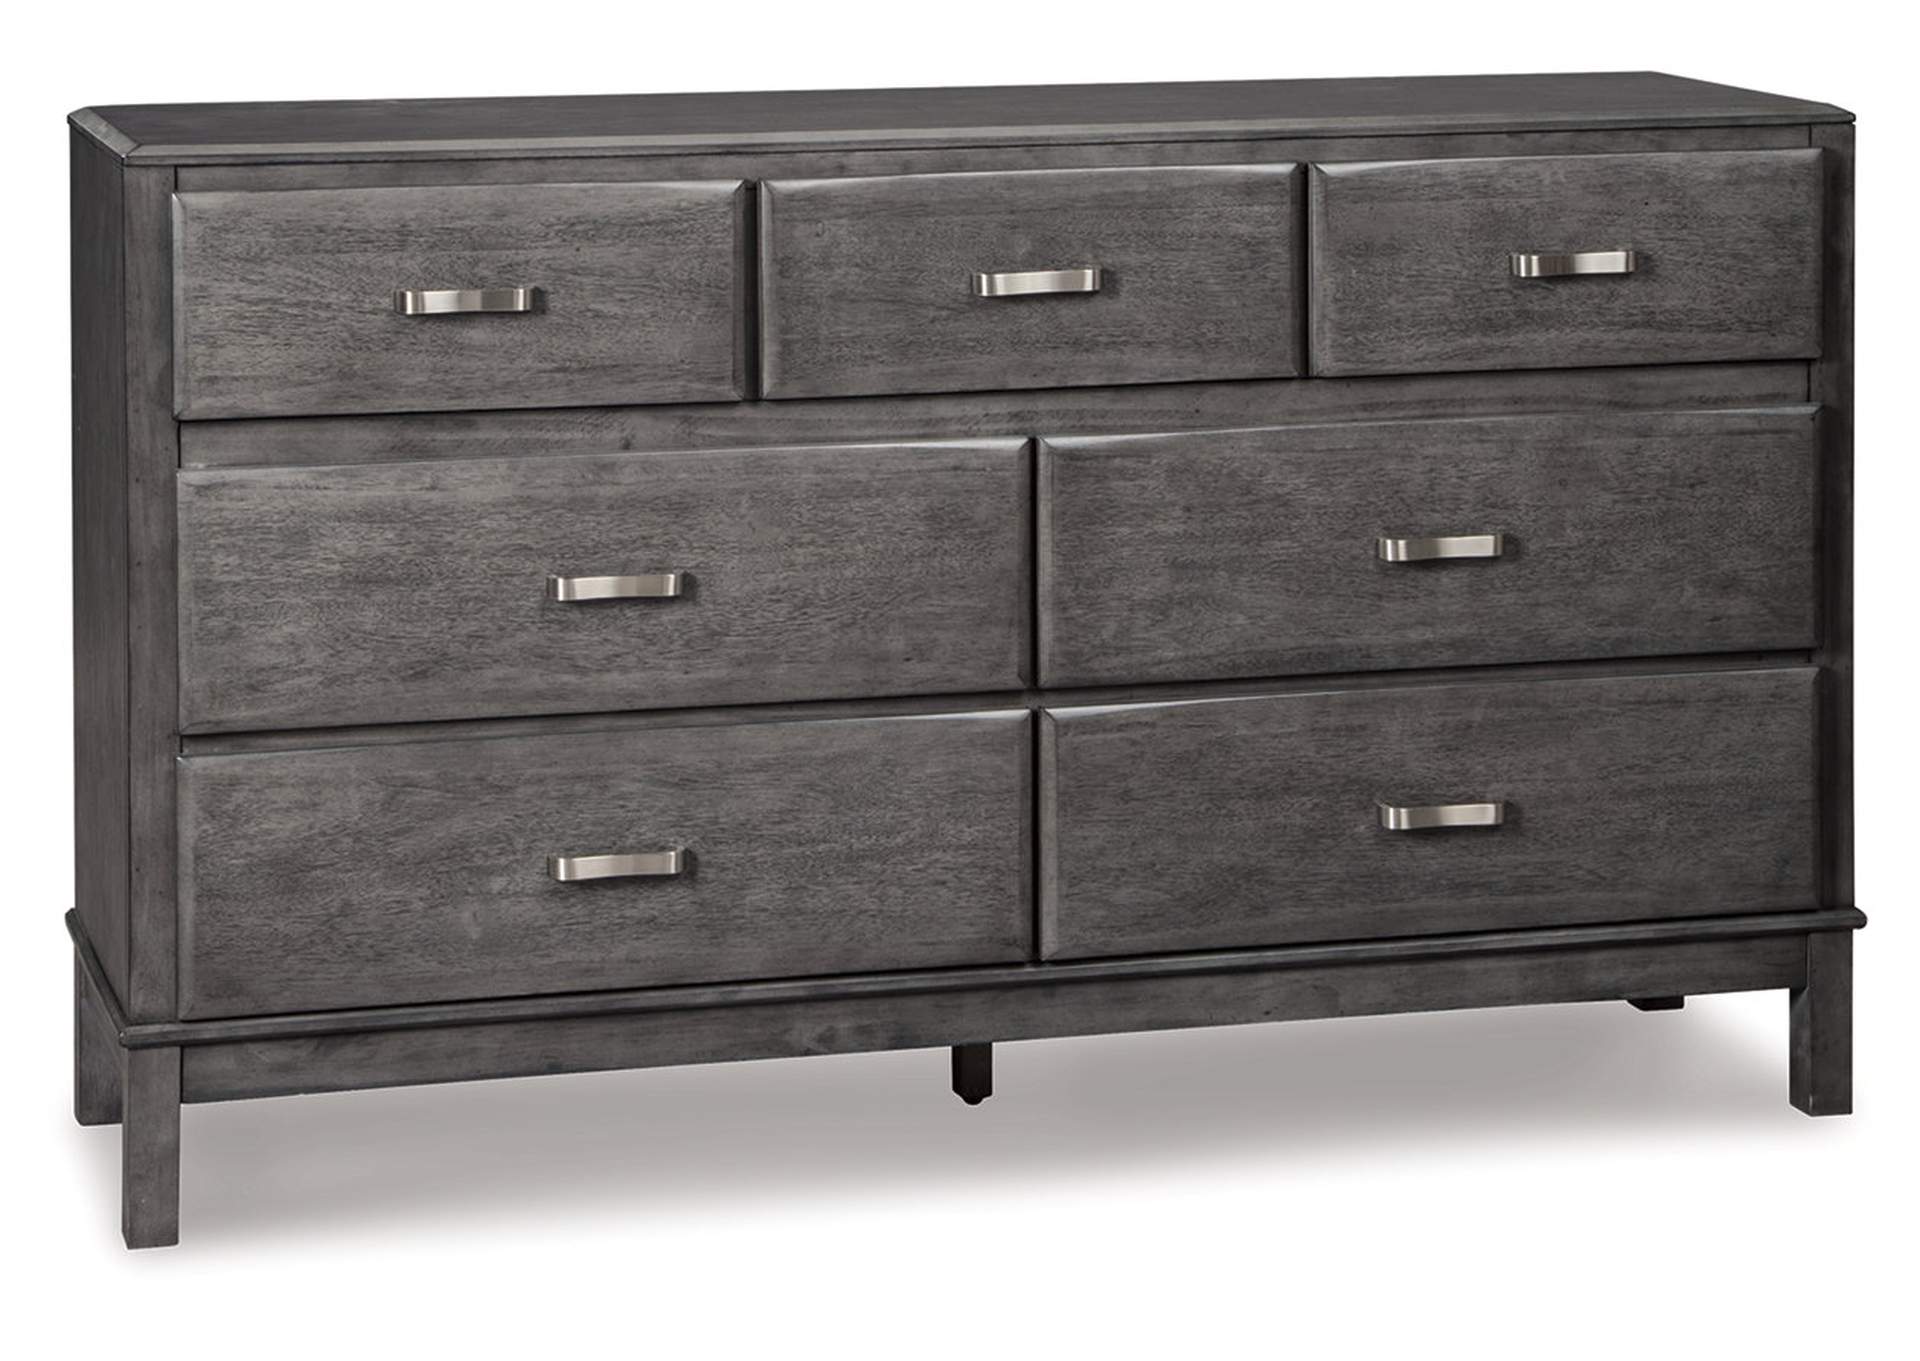 Caitbrook King Storage Bed, Dresser and Mirror,Signature Design By Ashley